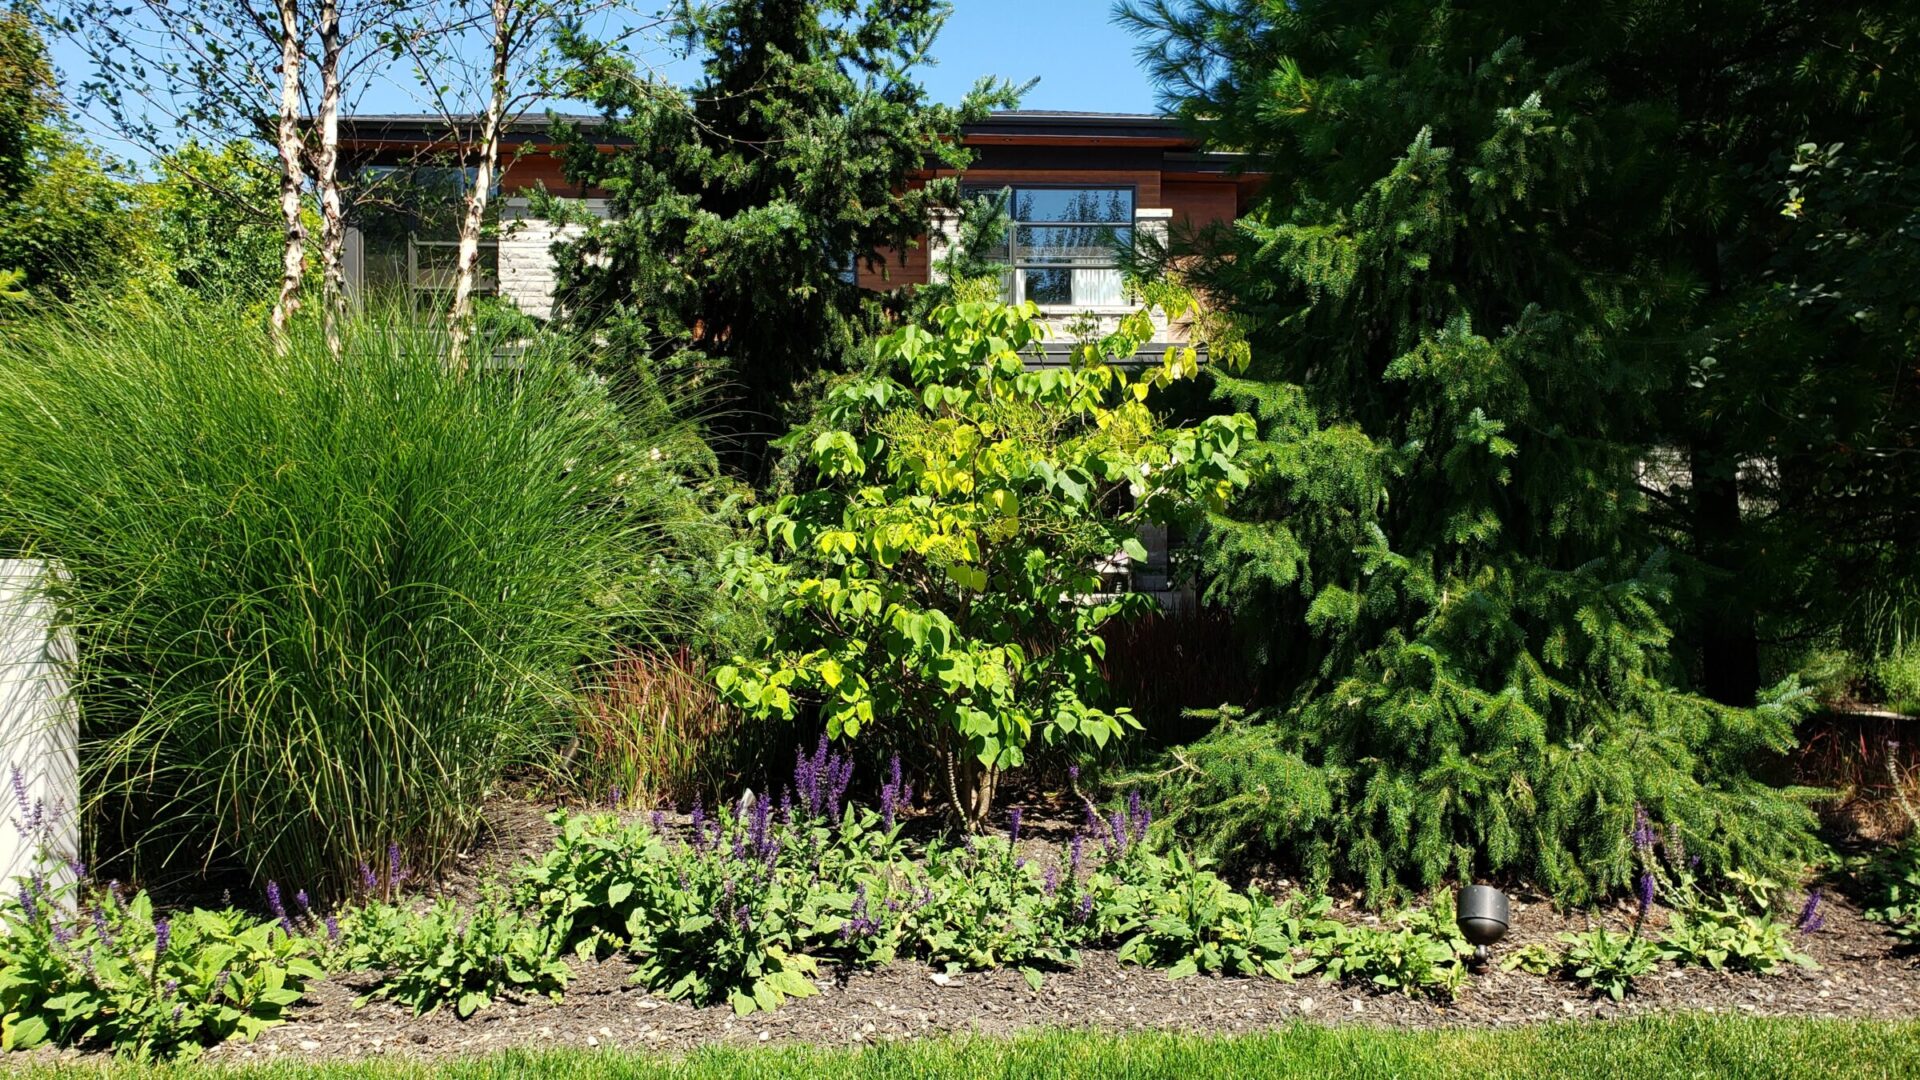 The image features a well-maintained garden with lush greenery, vibrant purple flowers, decorative grasses, and a house in the background.